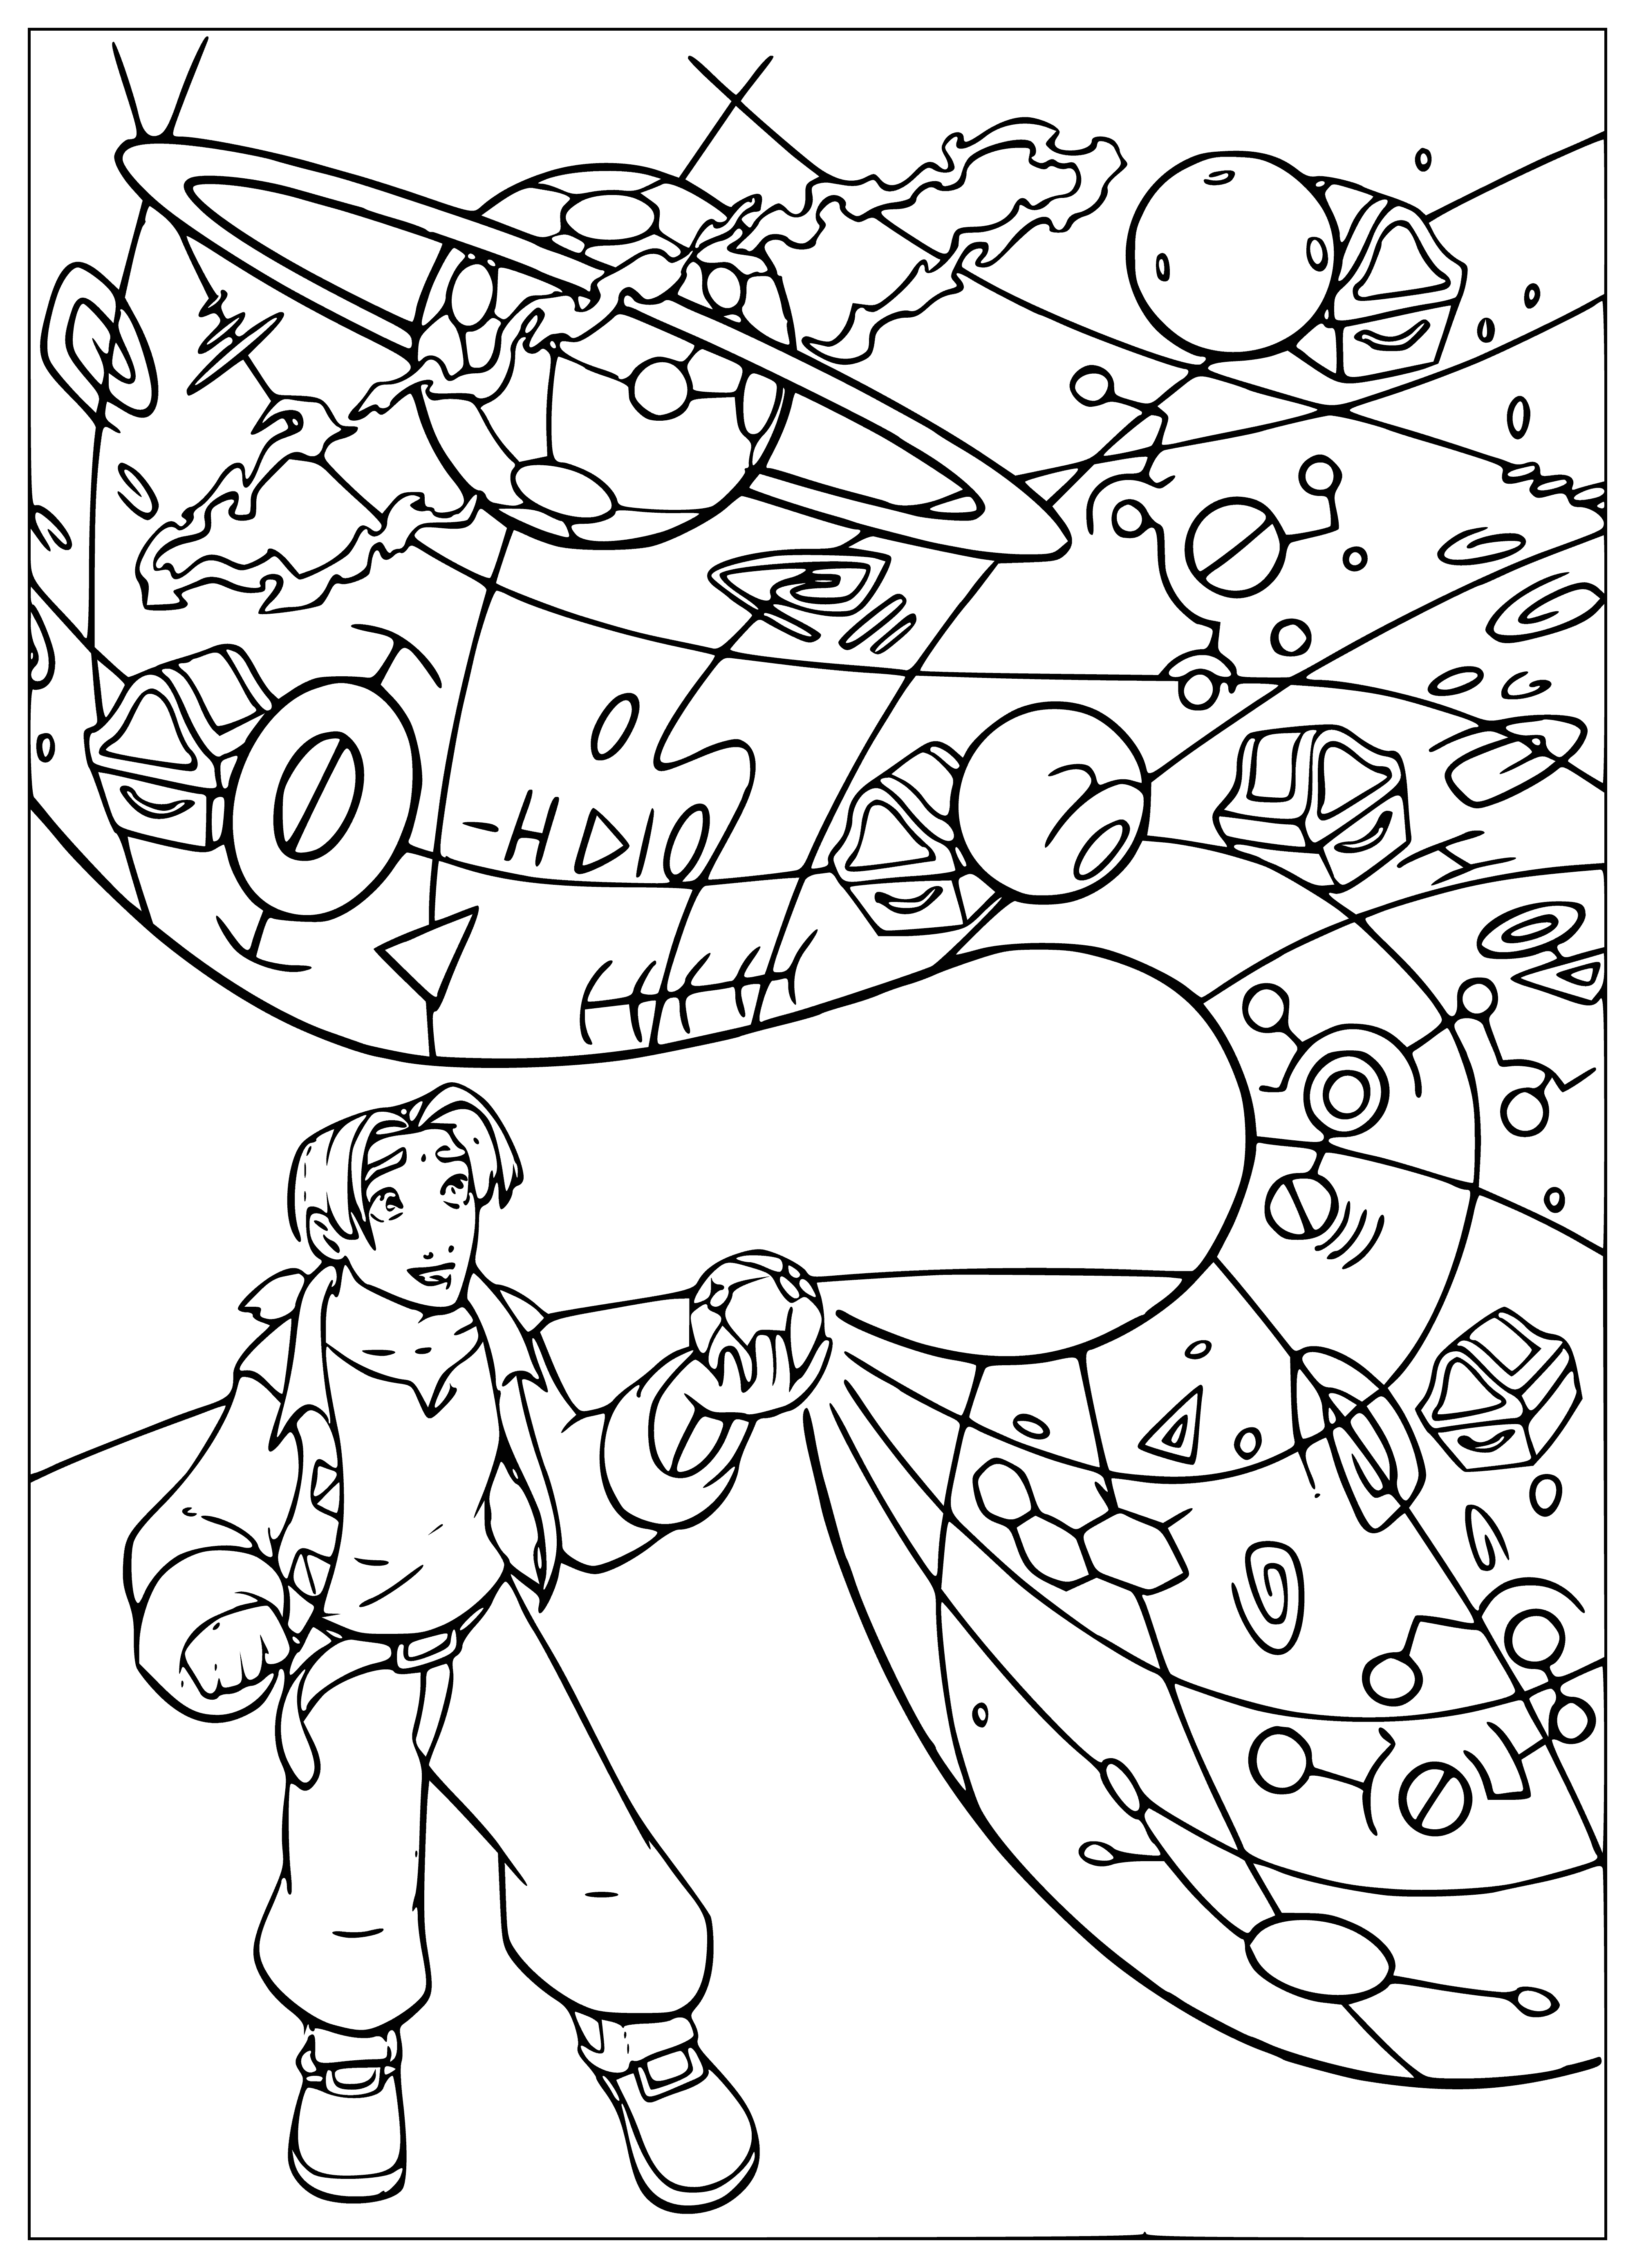 coloring page: Old map filled with symbols, key in corner, fraying around edges; a gold treasure waiting to be discovered. #mystery #historycircle